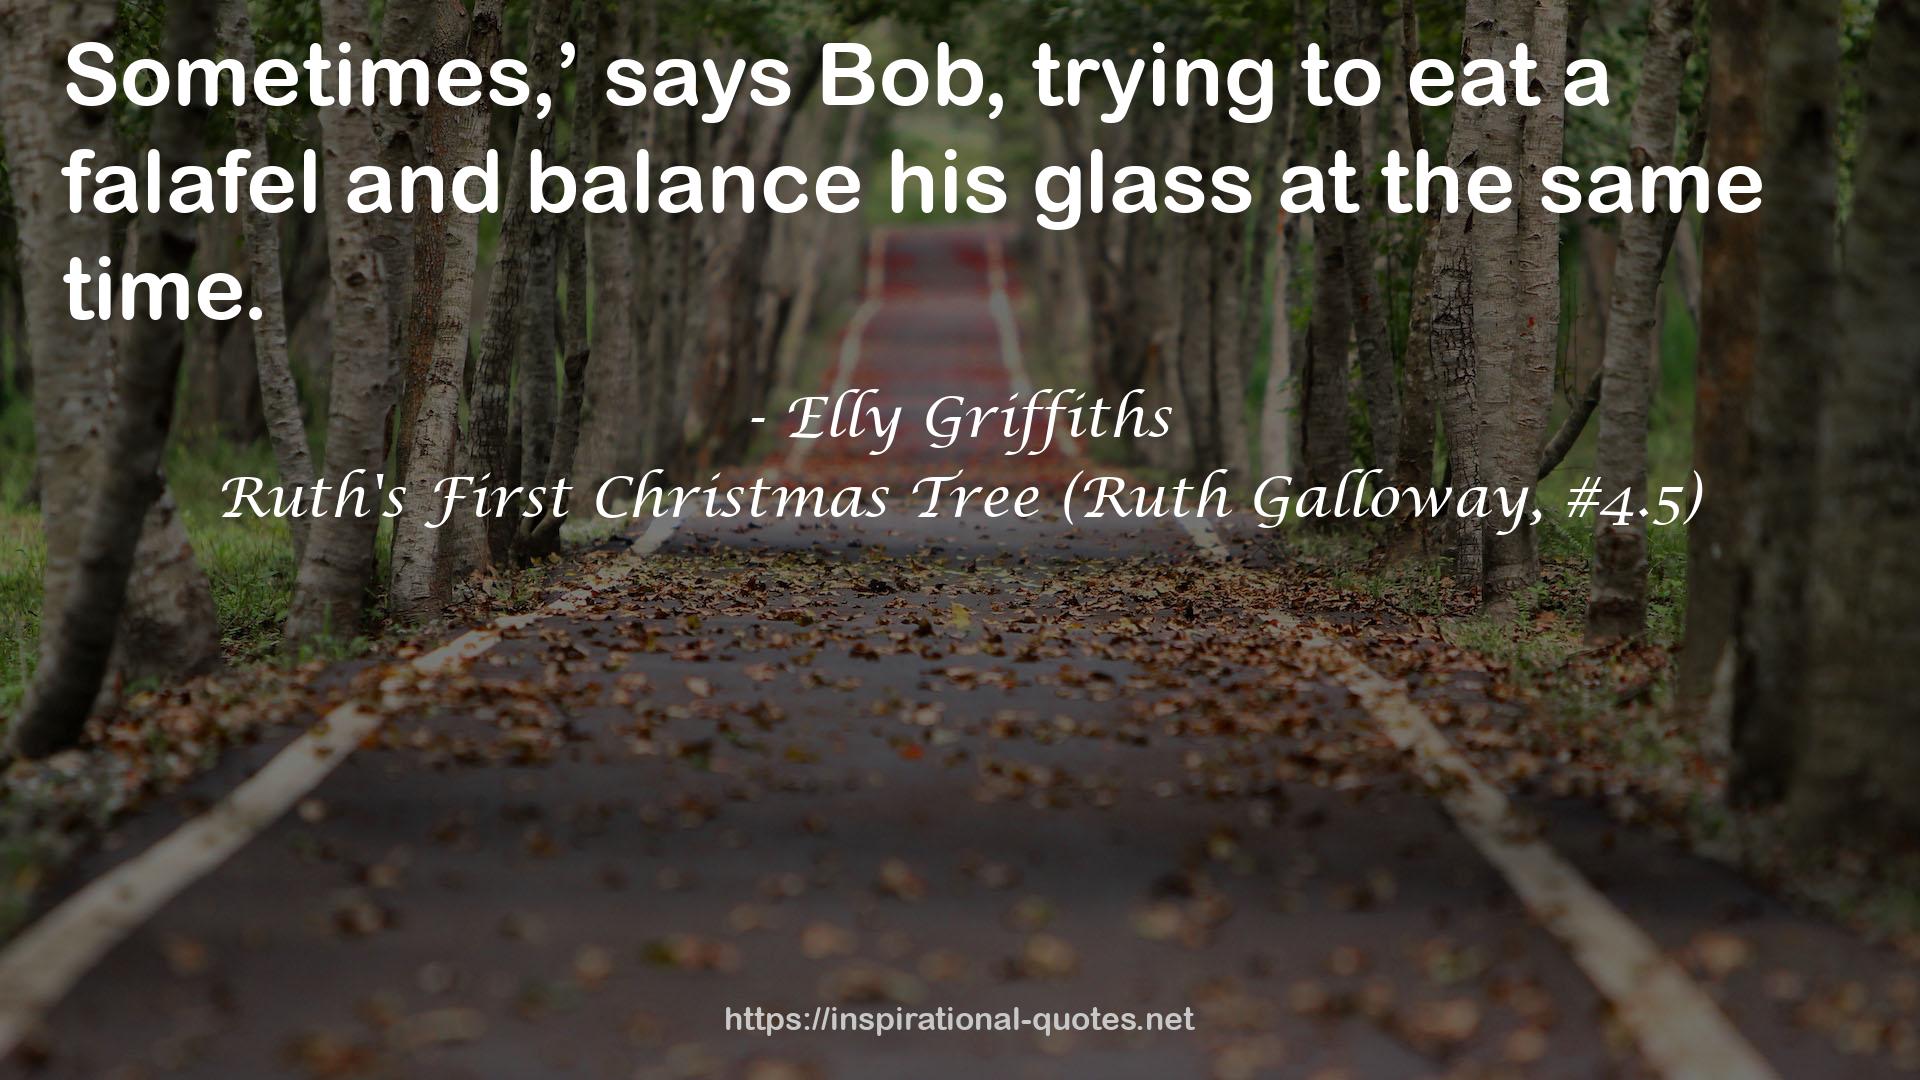 Ruth's First Christmas Tree (Ruth Galloway, #4.5) QUOTES